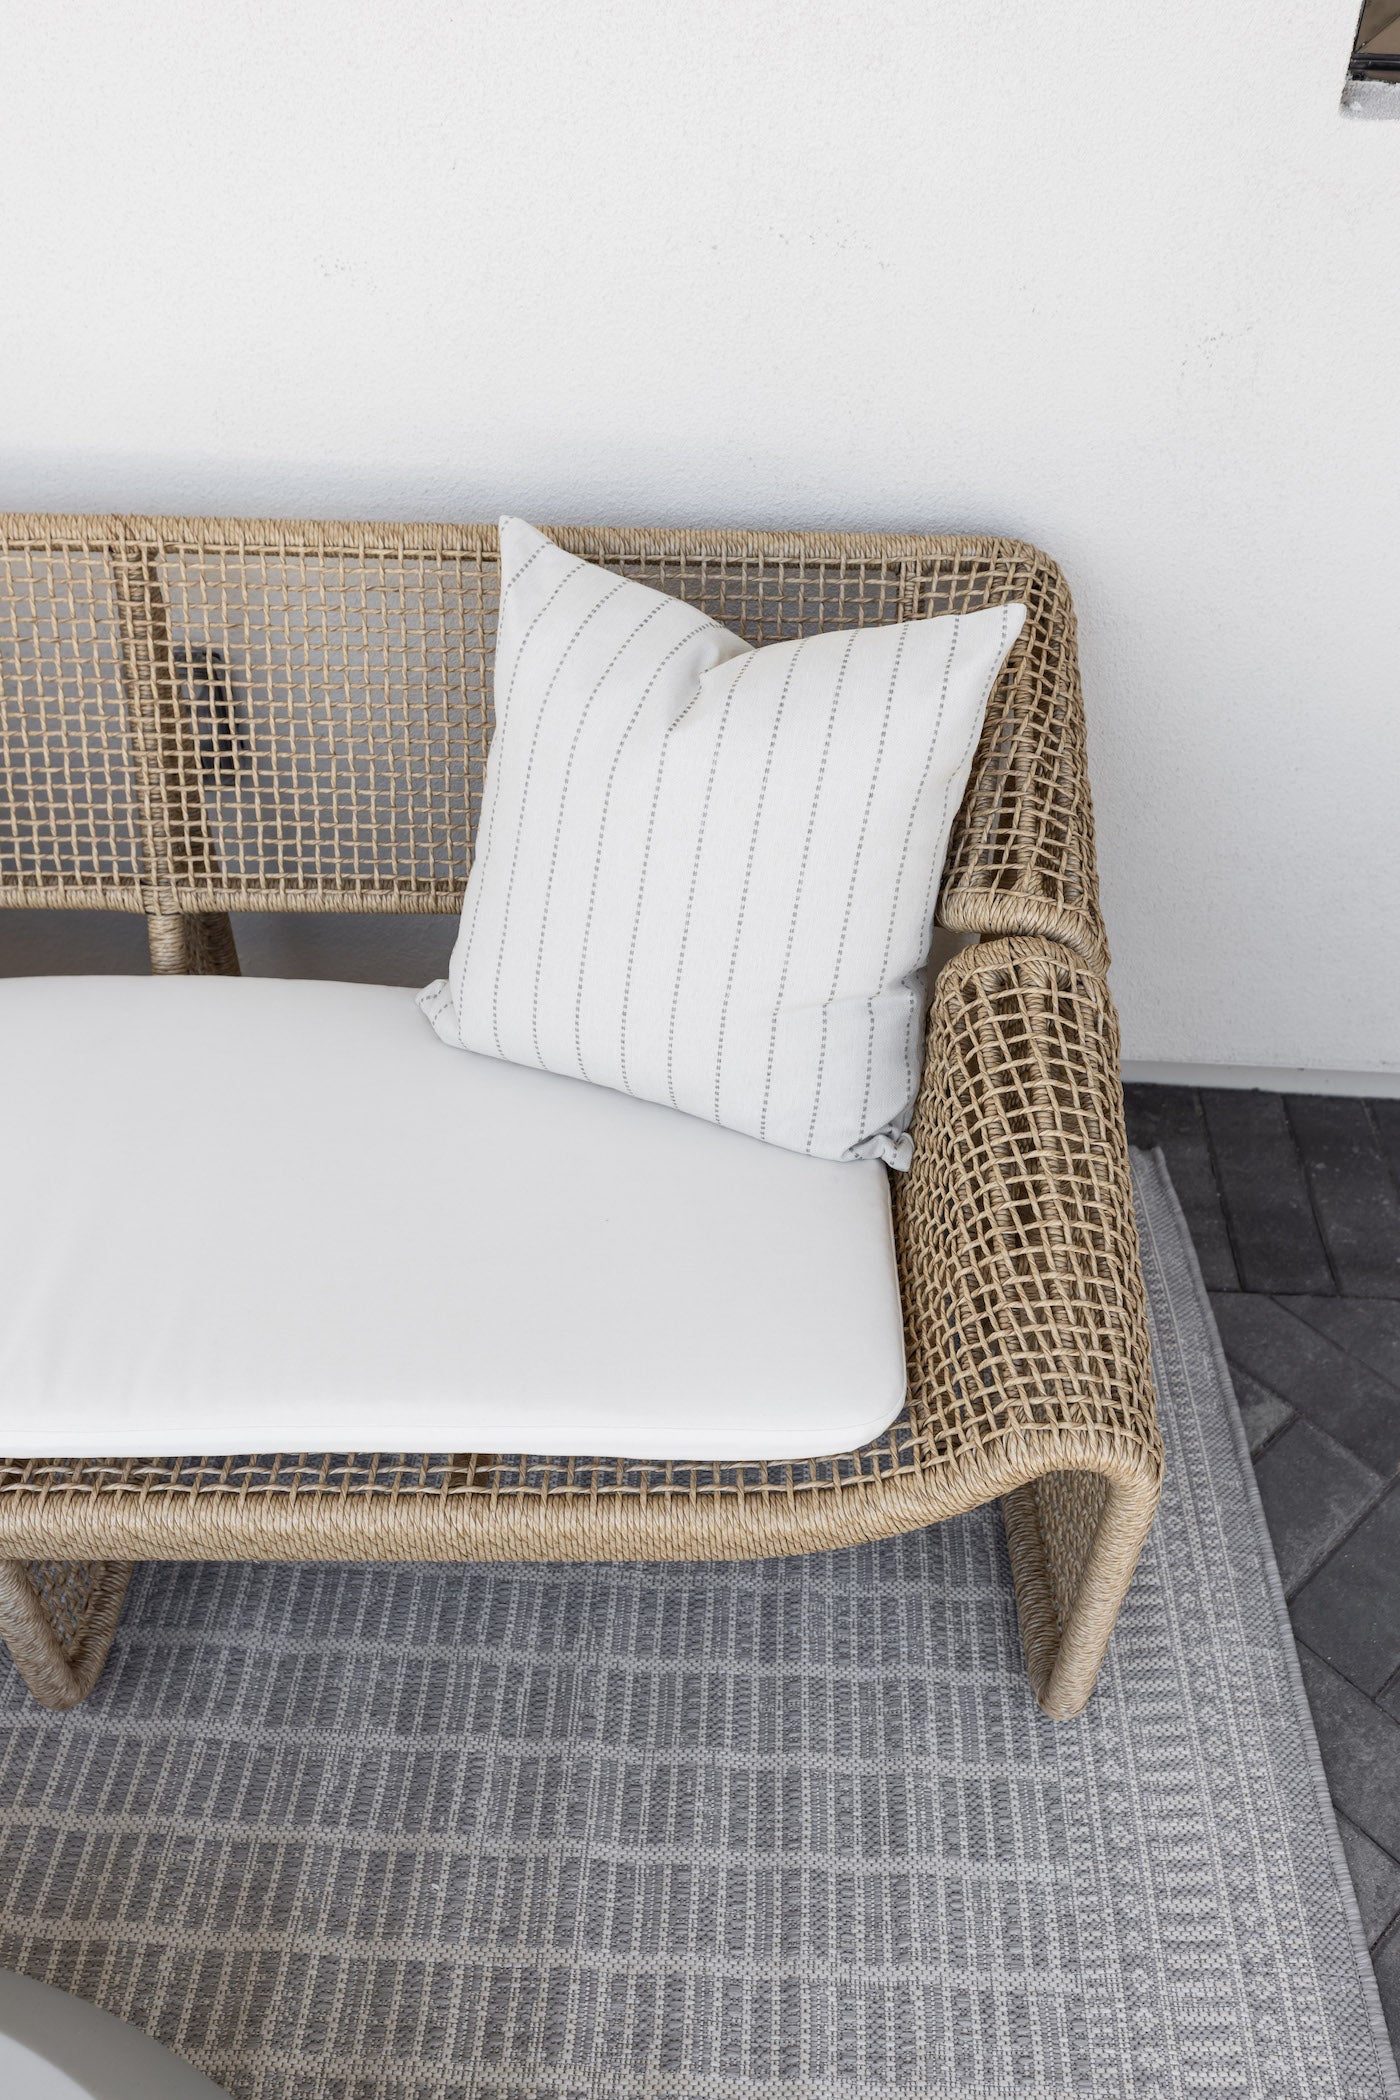 Selvie Outdoor Sofa - 2 Colors